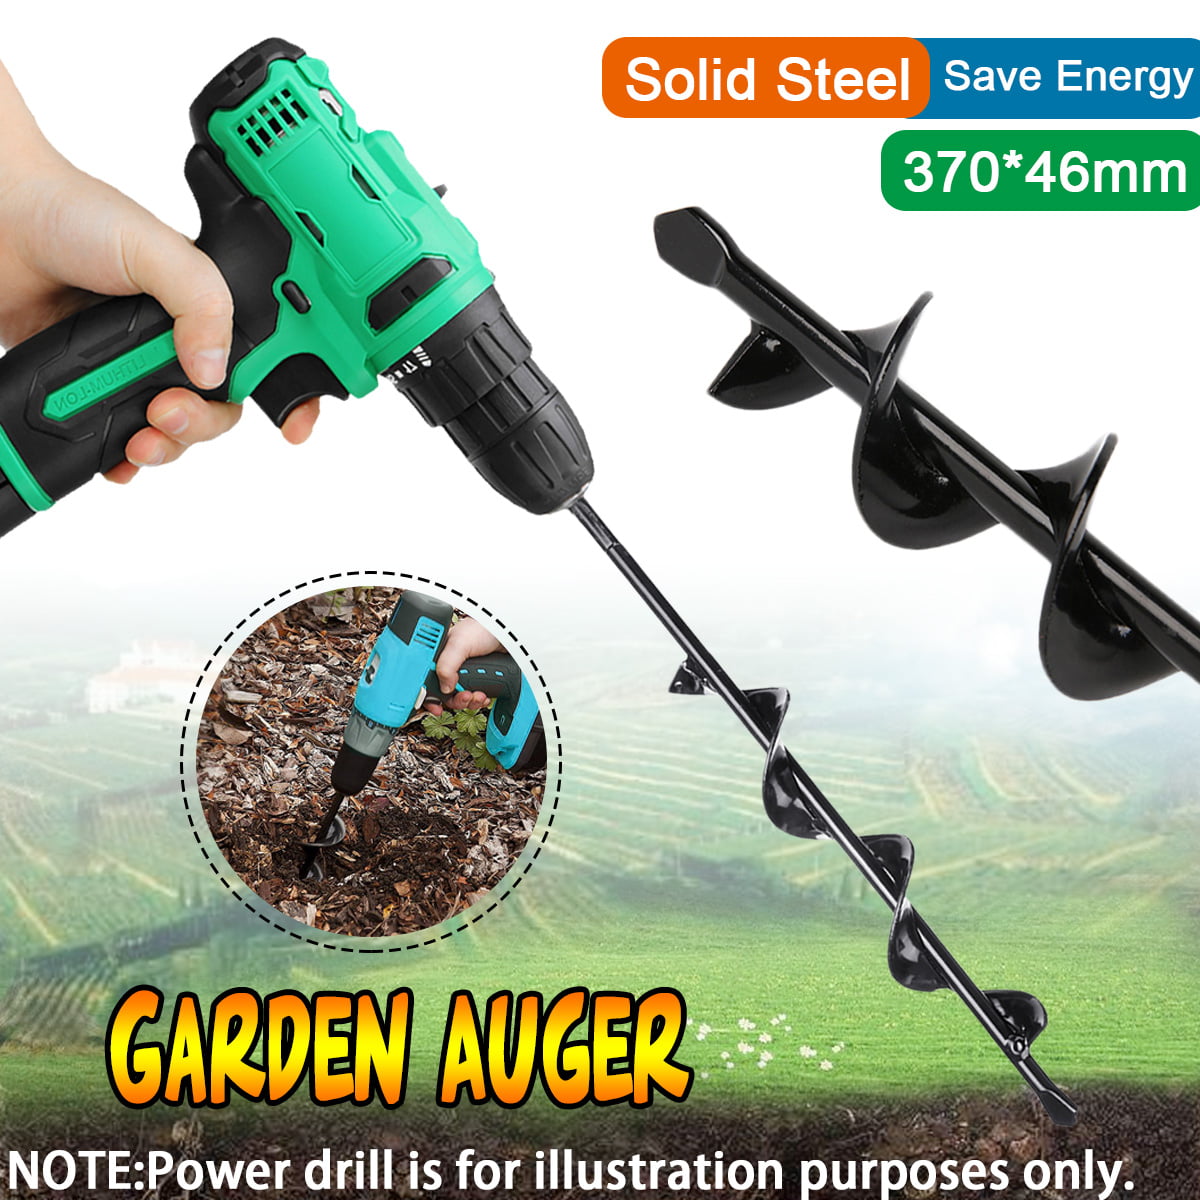 Small Earth Auger Spiral Drill Bit Post Hole Digger Power Kit Garden Auger Tools 